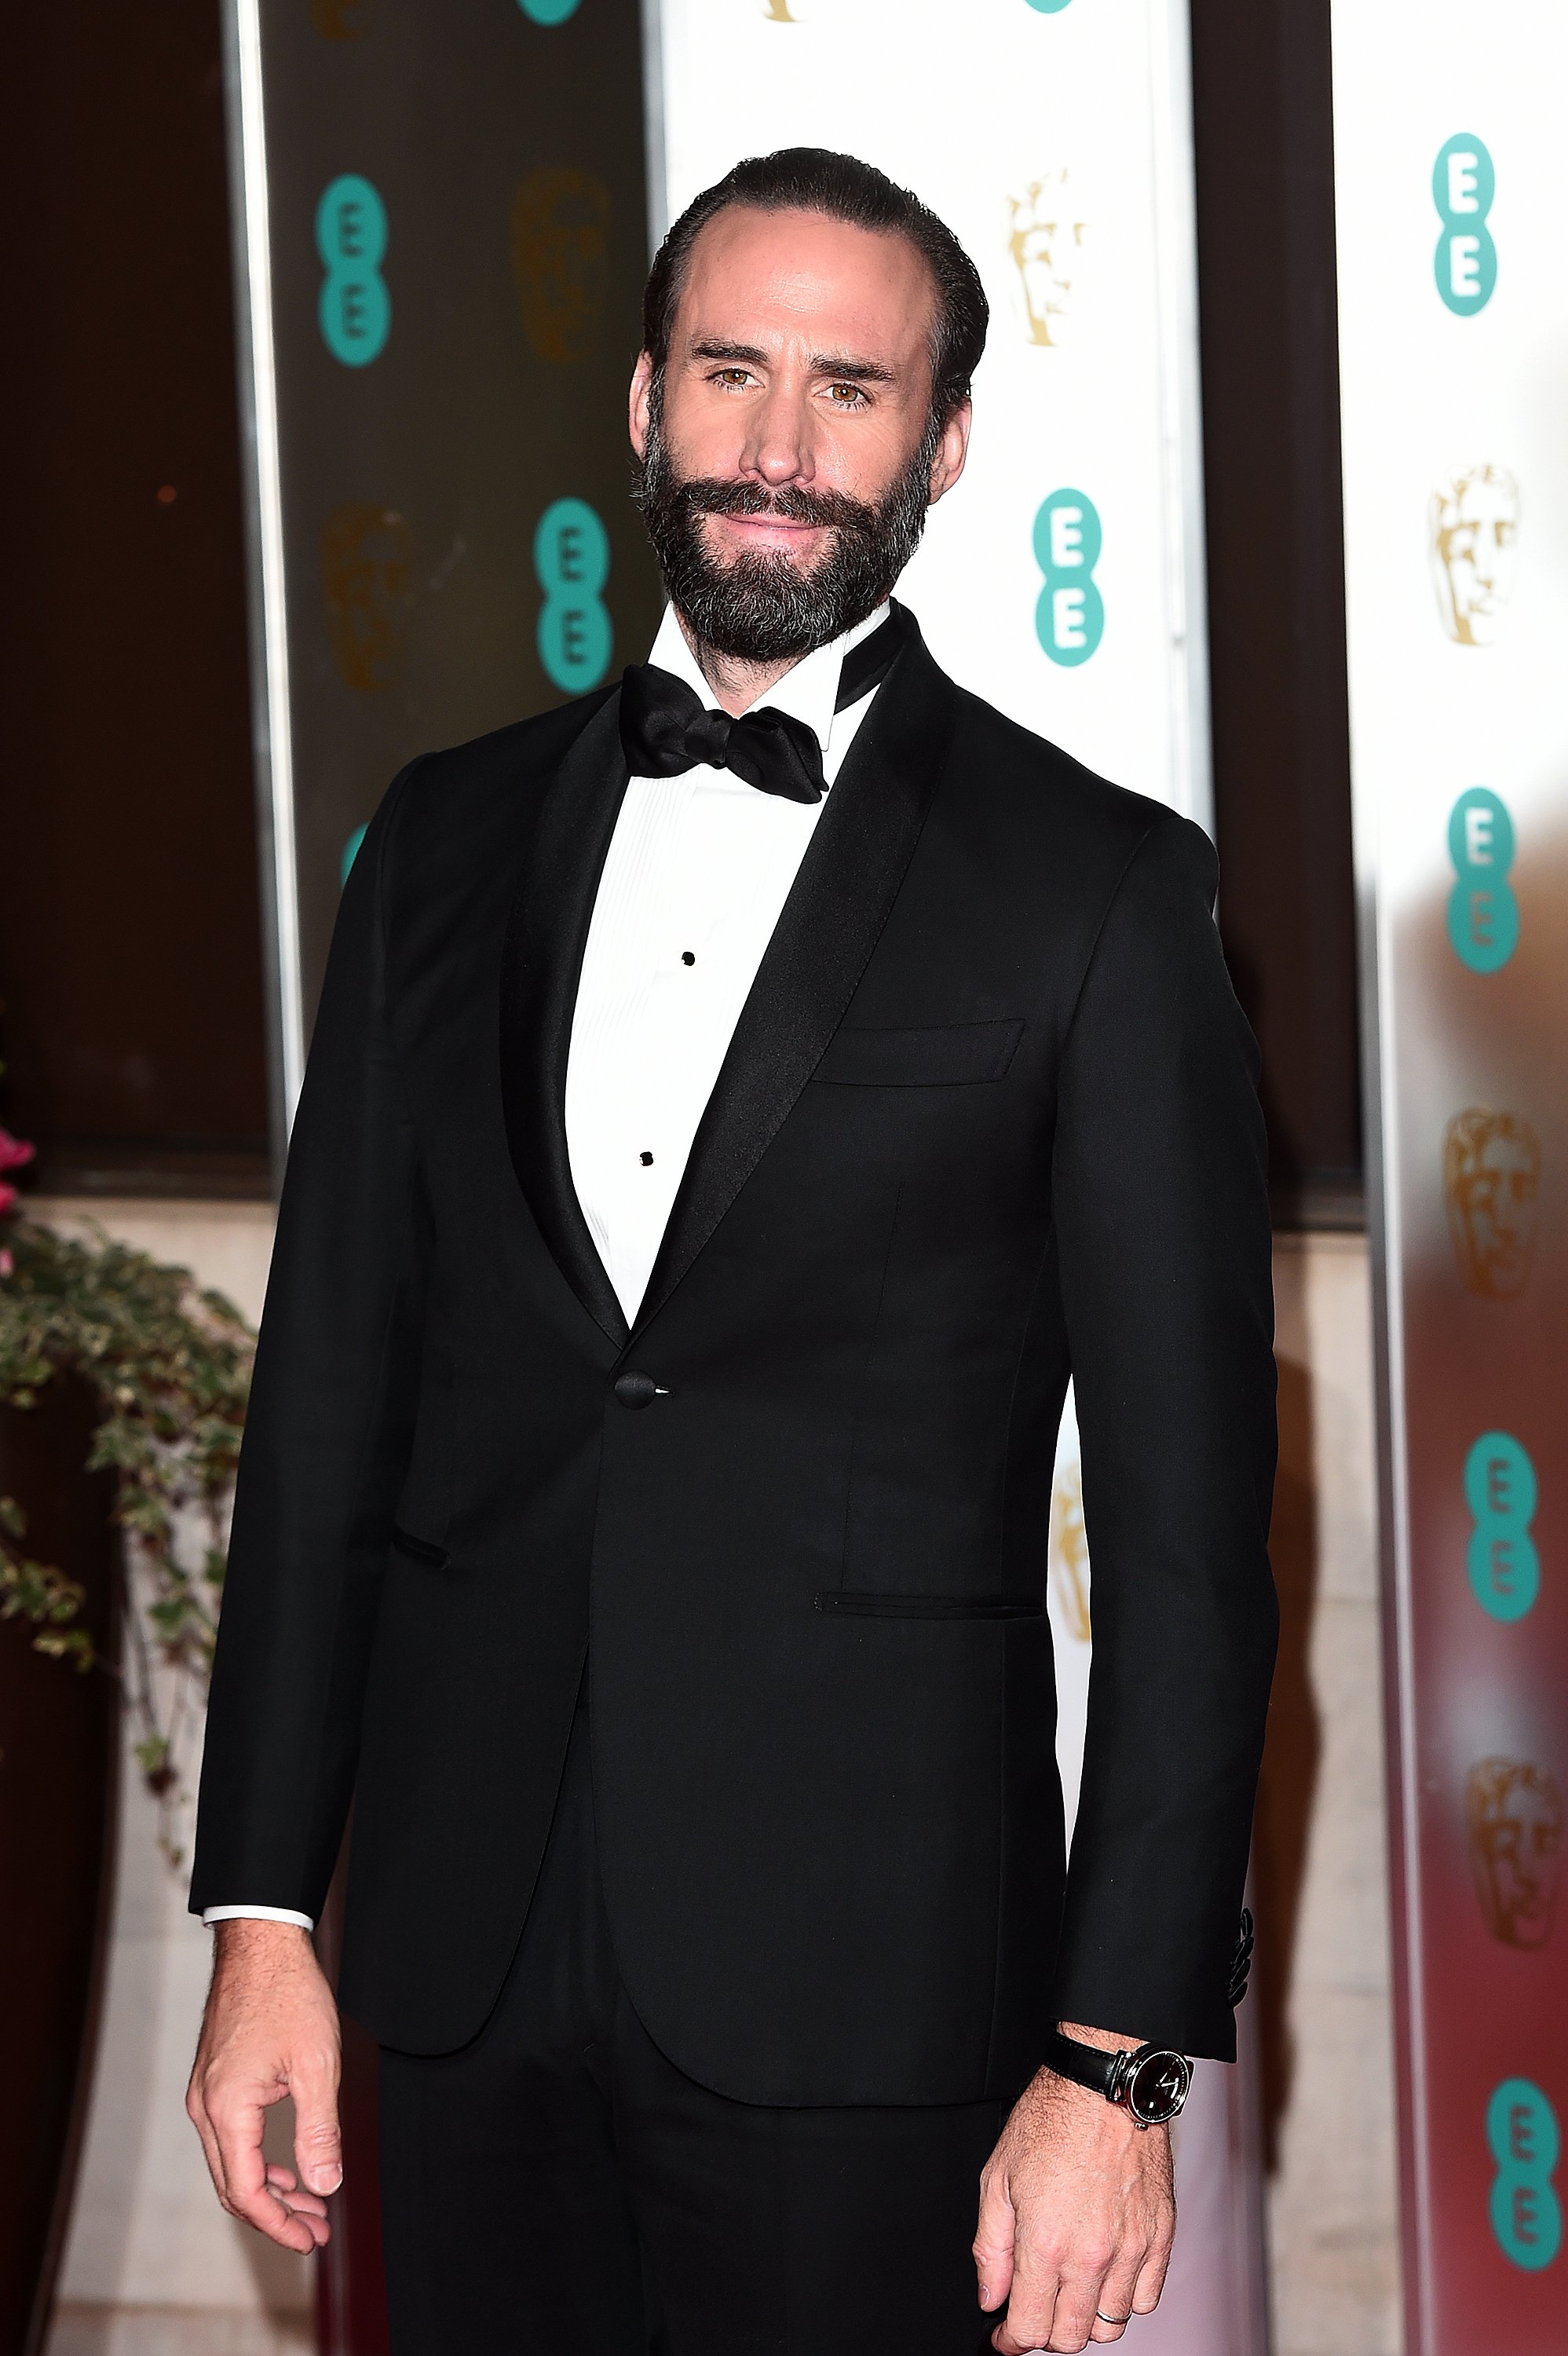 Joseph Fiennes attends the EE British Academy Film Awards Gala Dinner at Grosvenor House on February 10, 2019, in London, England. | Source: Getty Images